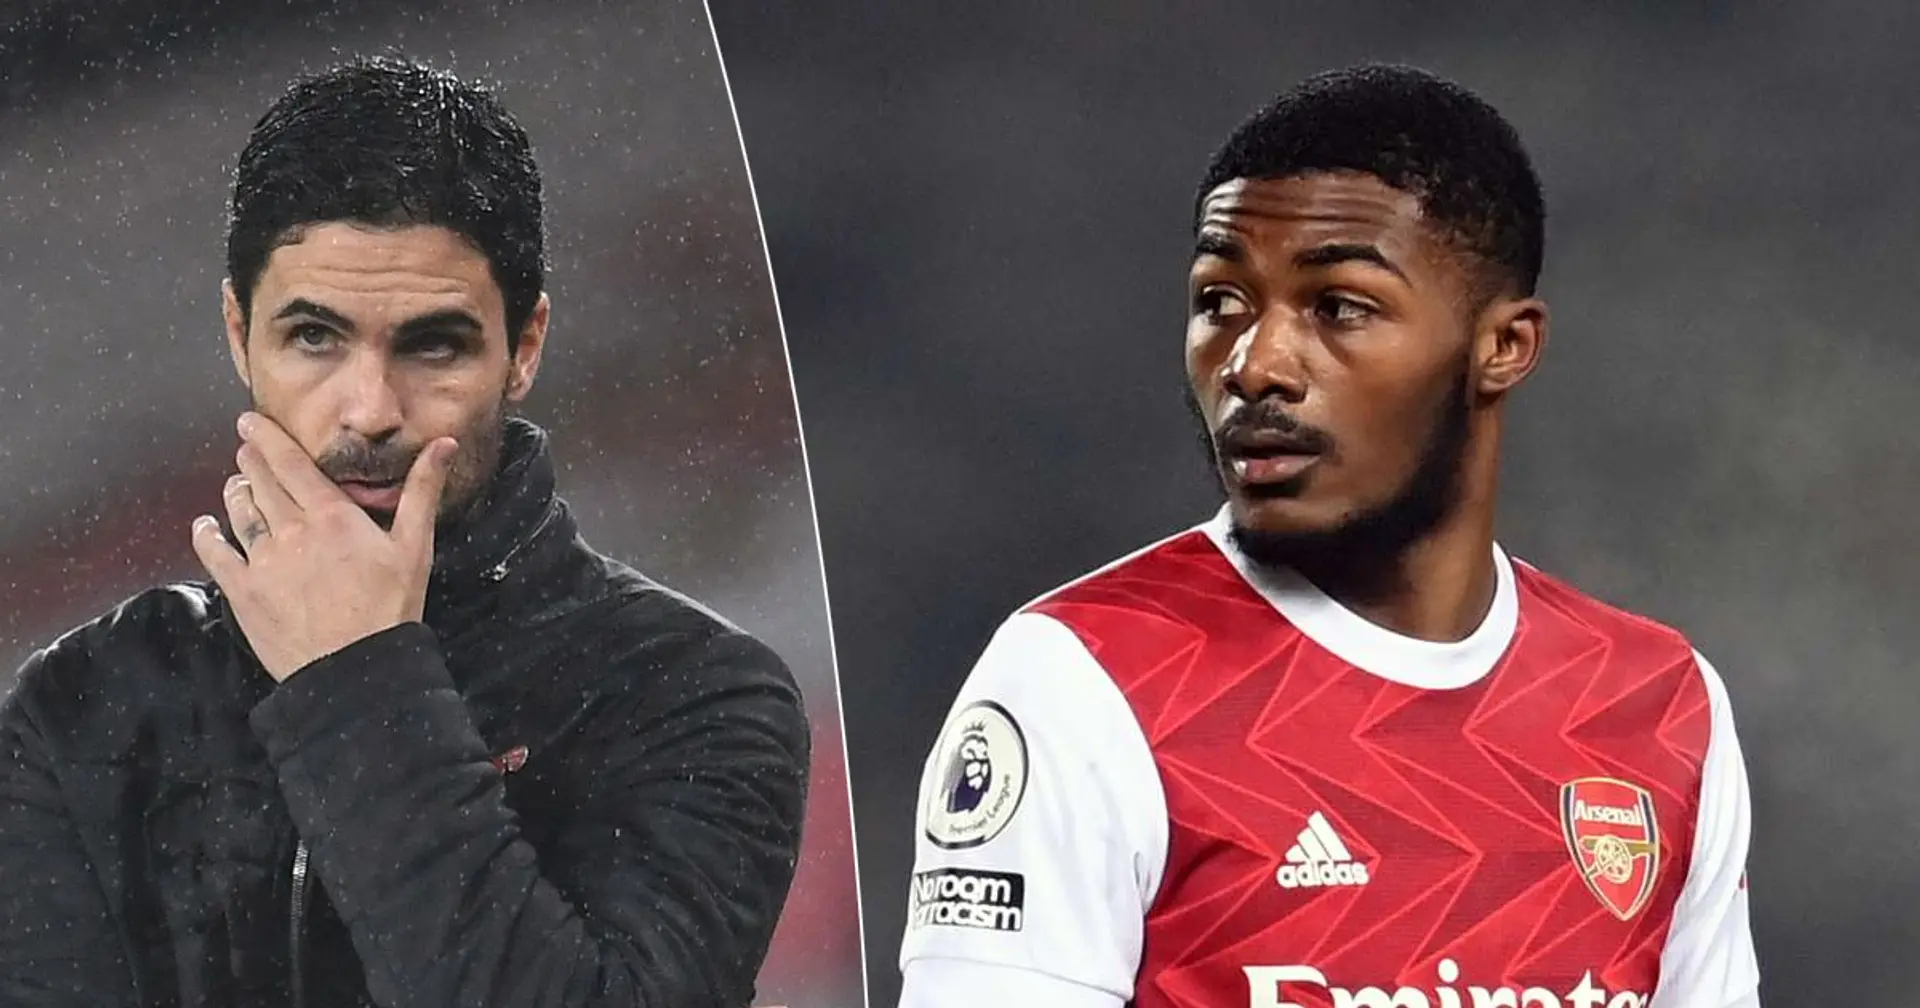 Maitland-Niles reflects on his fall from Arsenal starter to bench player, bemoans lack of 'contact' from Arteta